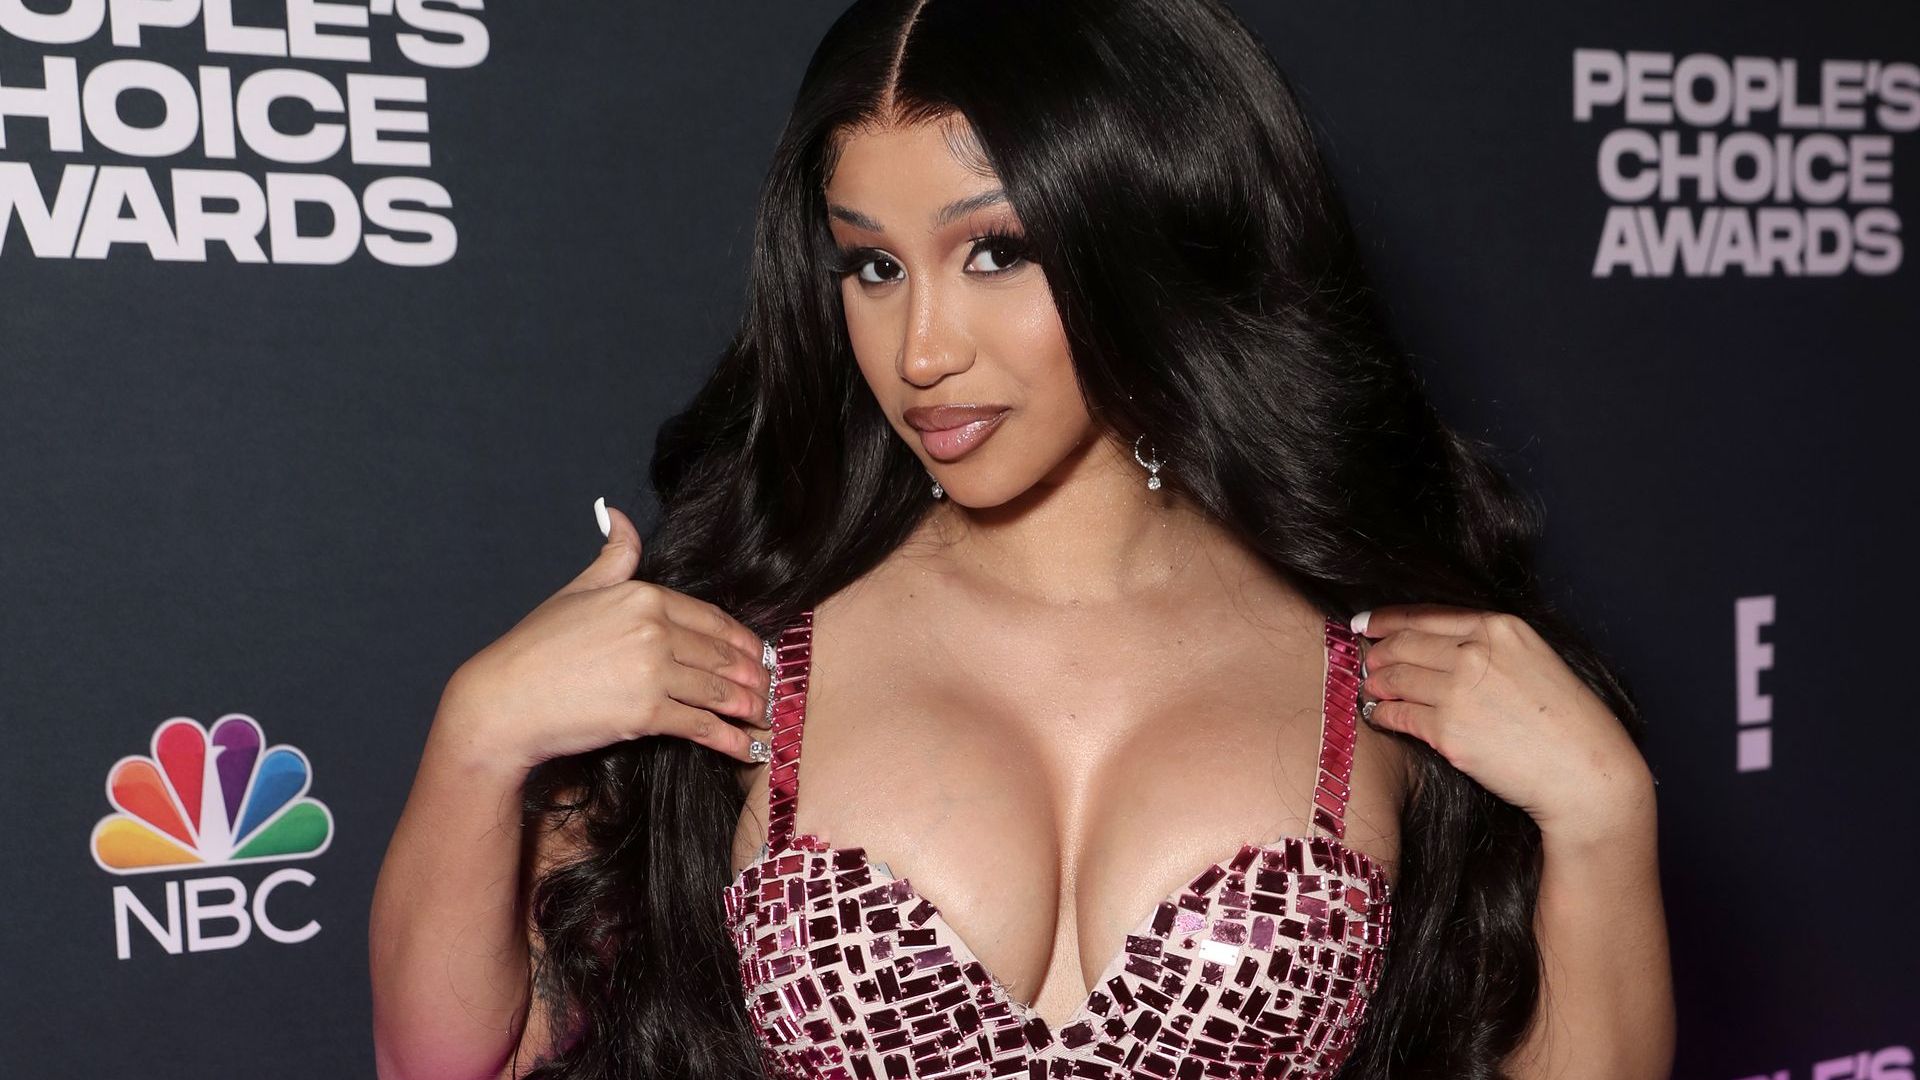 Cardi Weighs in on Next Superstars in Rap Debate Started by TDEs Punch While Flexing She Gets $1 Million a Show Complex picture